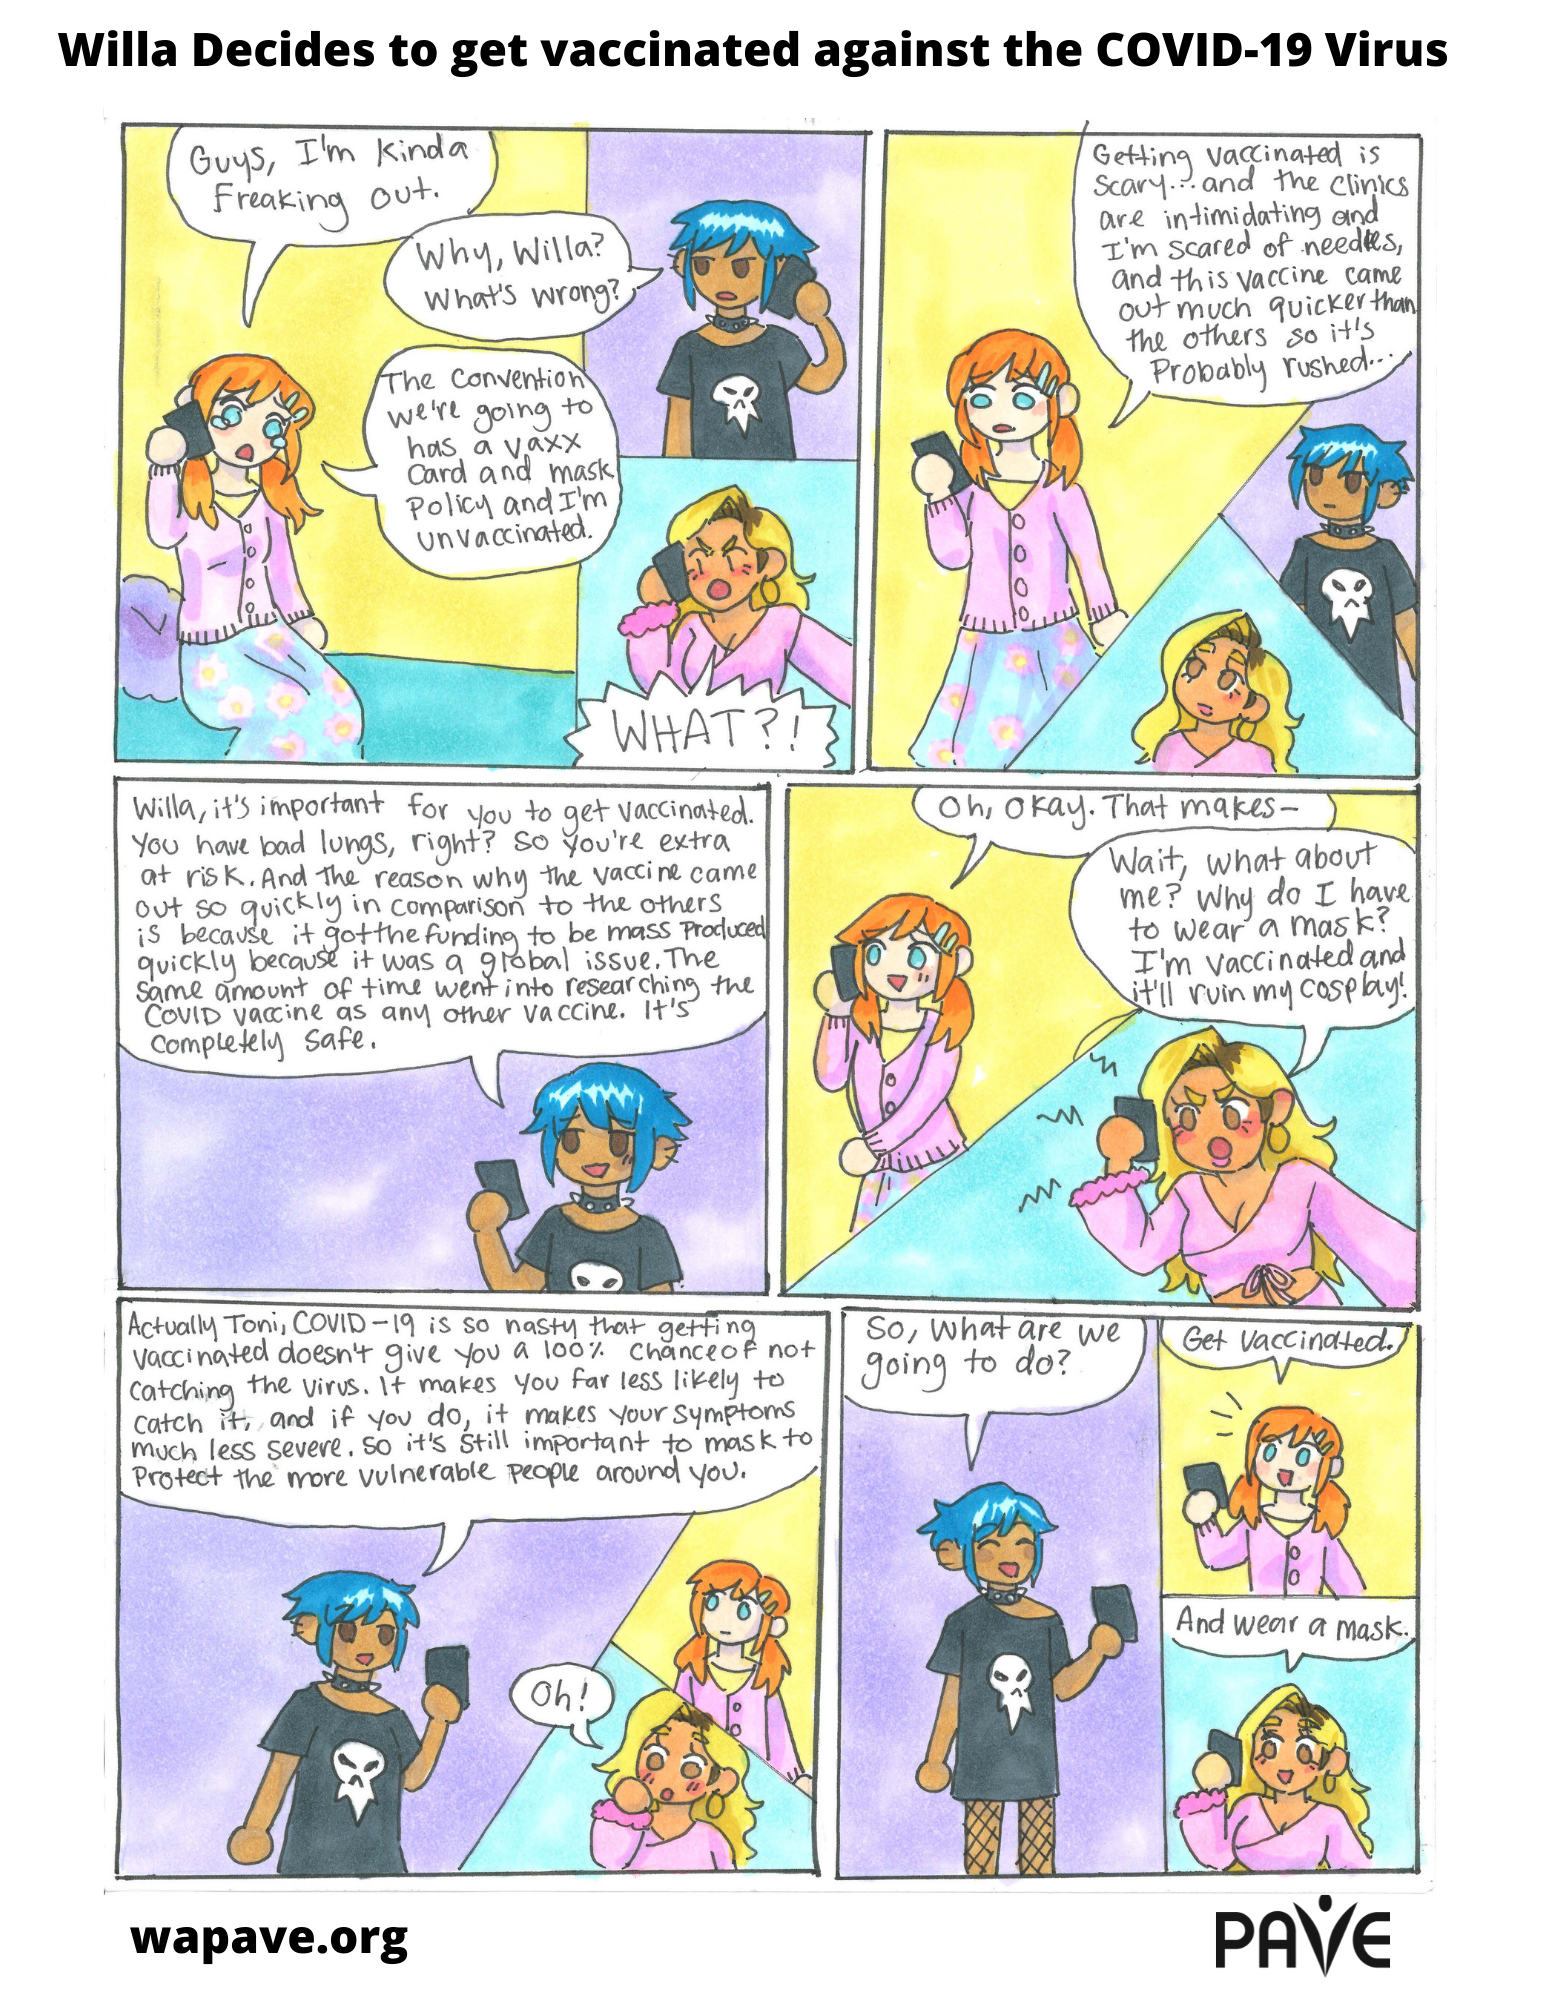 Comic page about Willa a character that decides to get vaccinated against the COVID-19 virus